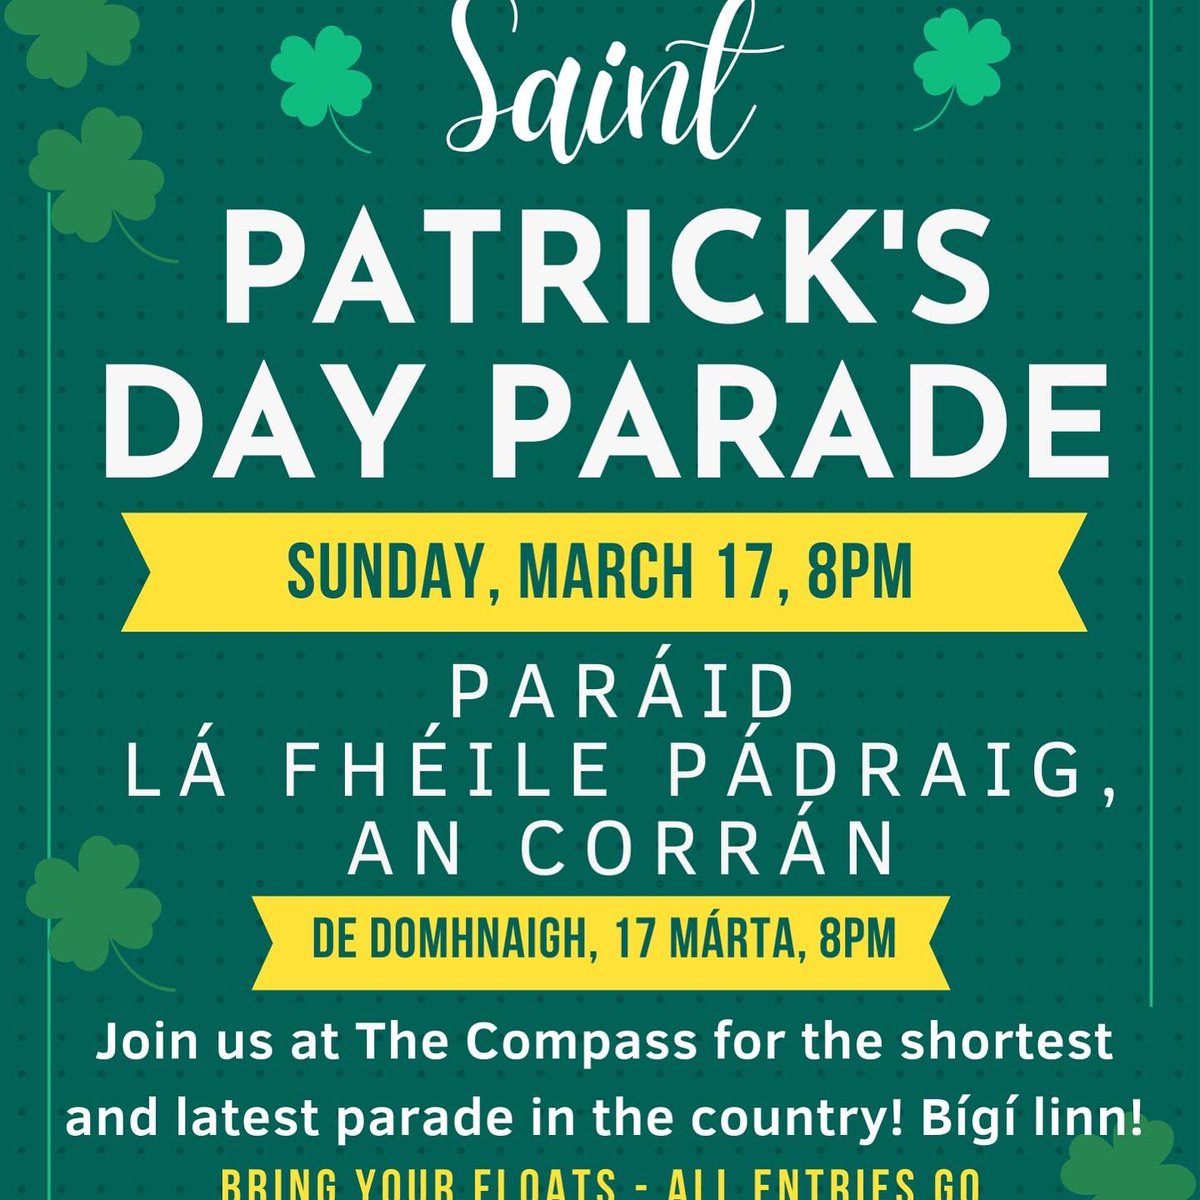 We’ve a busy weekend coming up! Hope to see you at some stage of our mini #StPatricks Festival!! #TheCompass #Currane #CraicAgusOl #stpatricksdayparade